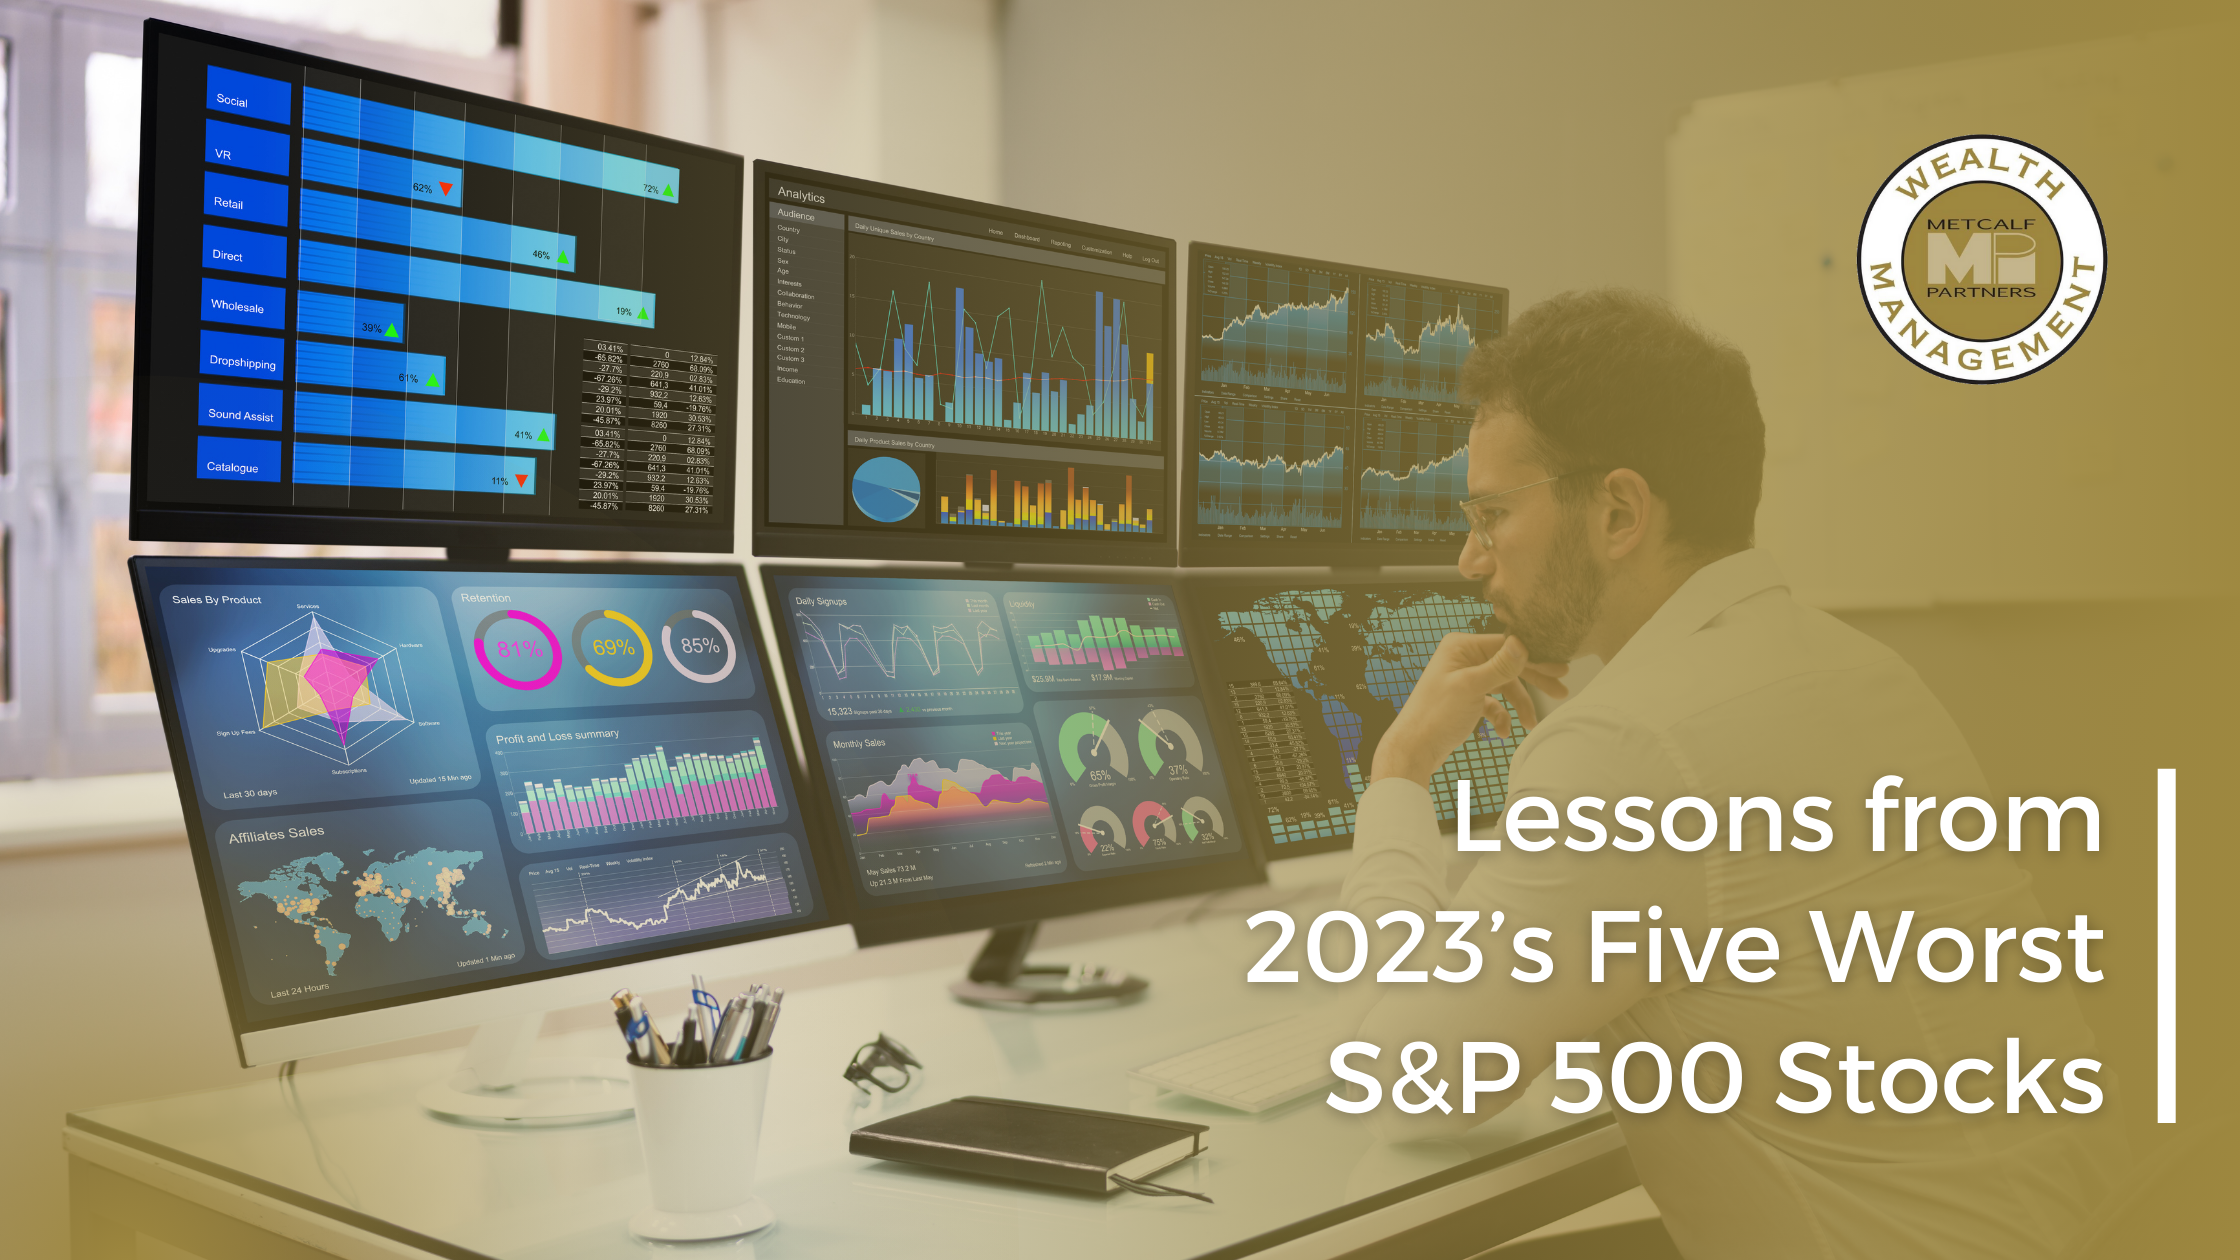 Featured image for “Lessons from 2023’s Five Worst S&P 500 Stocks”